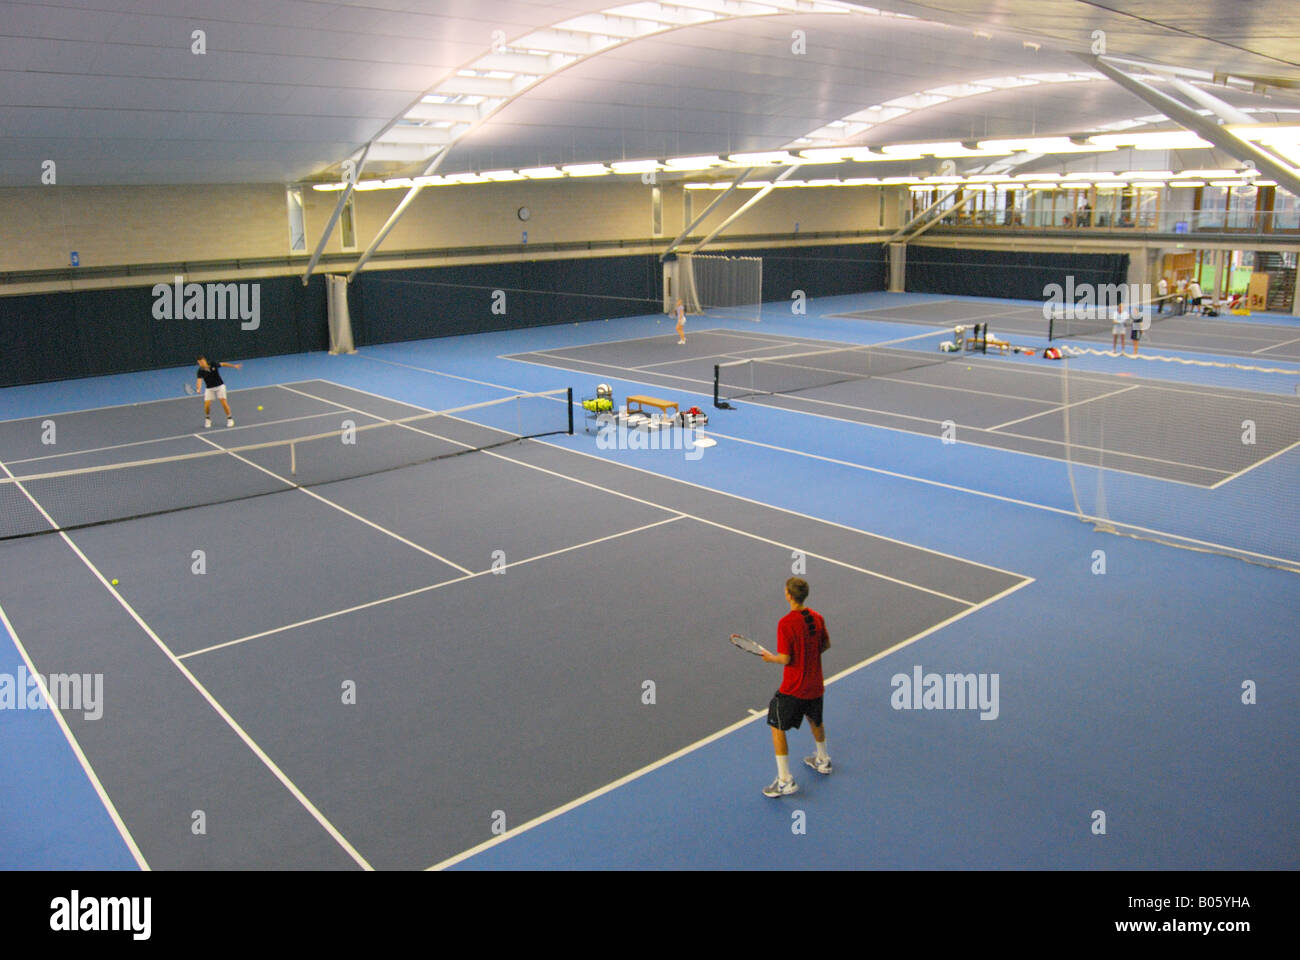 Indoor courts, National Tennis Centre, Priory Lane, Roehampton, London Borough of Wandsworth, Greater London, England, United Kingdom Stock Photo